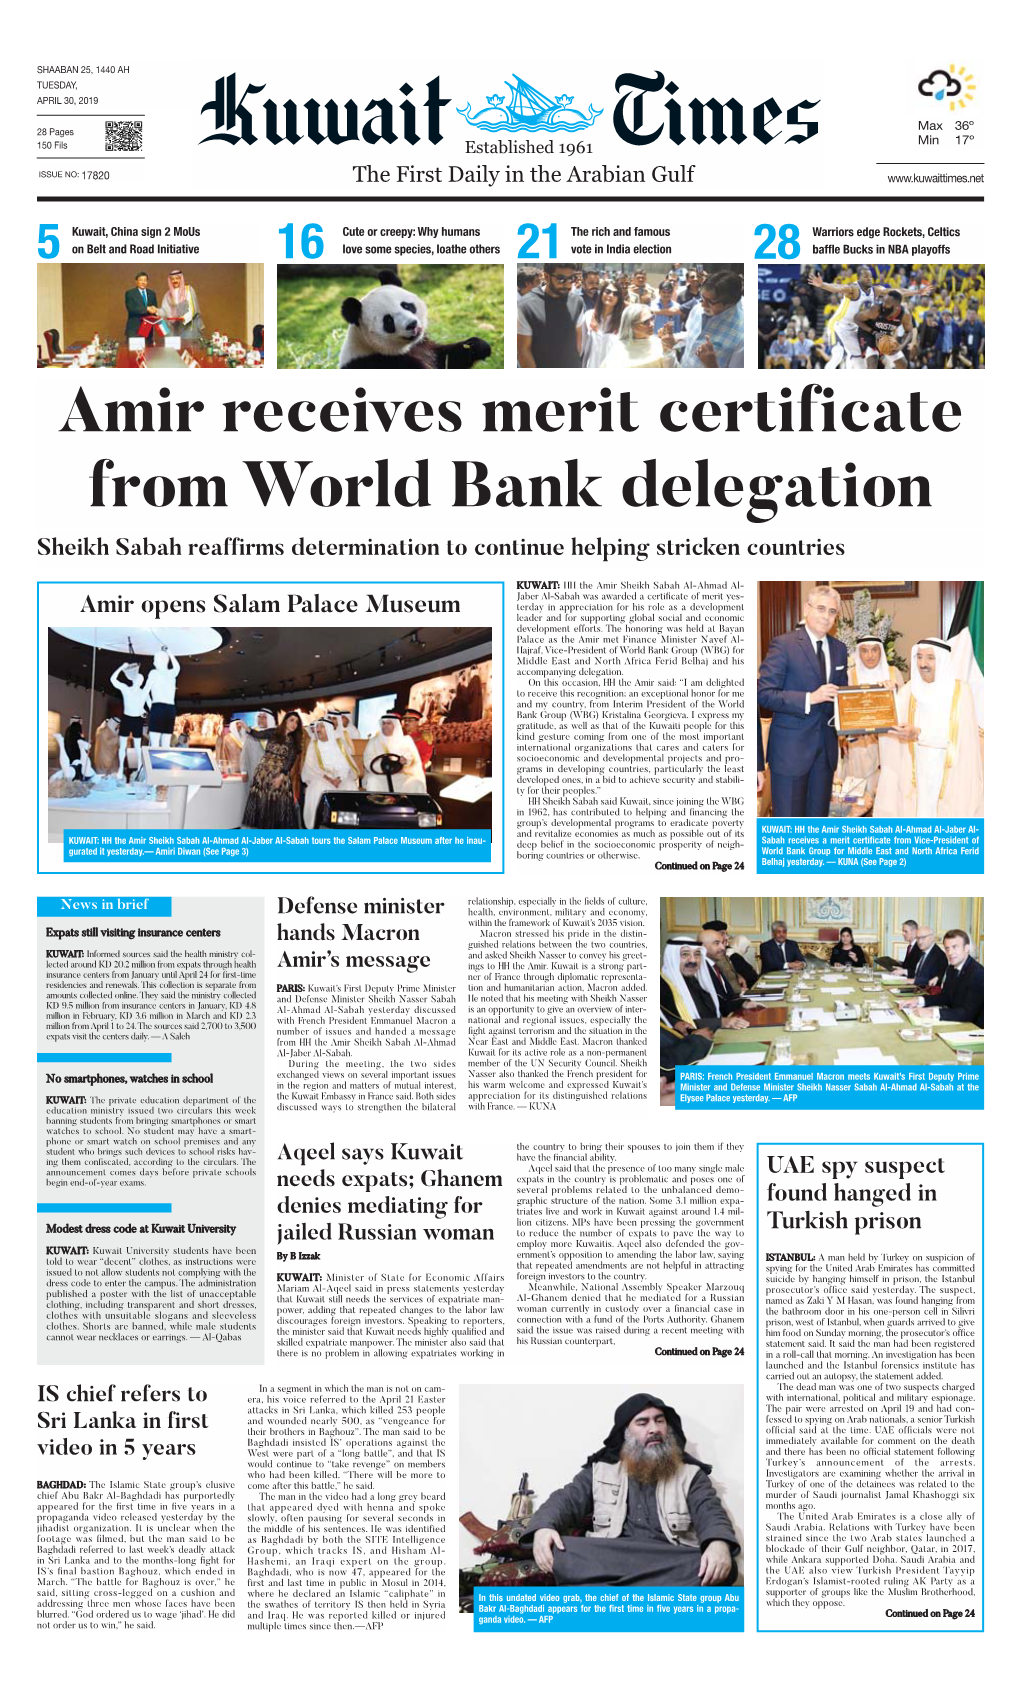 Amir Receives Merit Certificate from World Bank Delegation Sheikh Sabah Reaffirms Determination to Continue Helping Stricken Countries